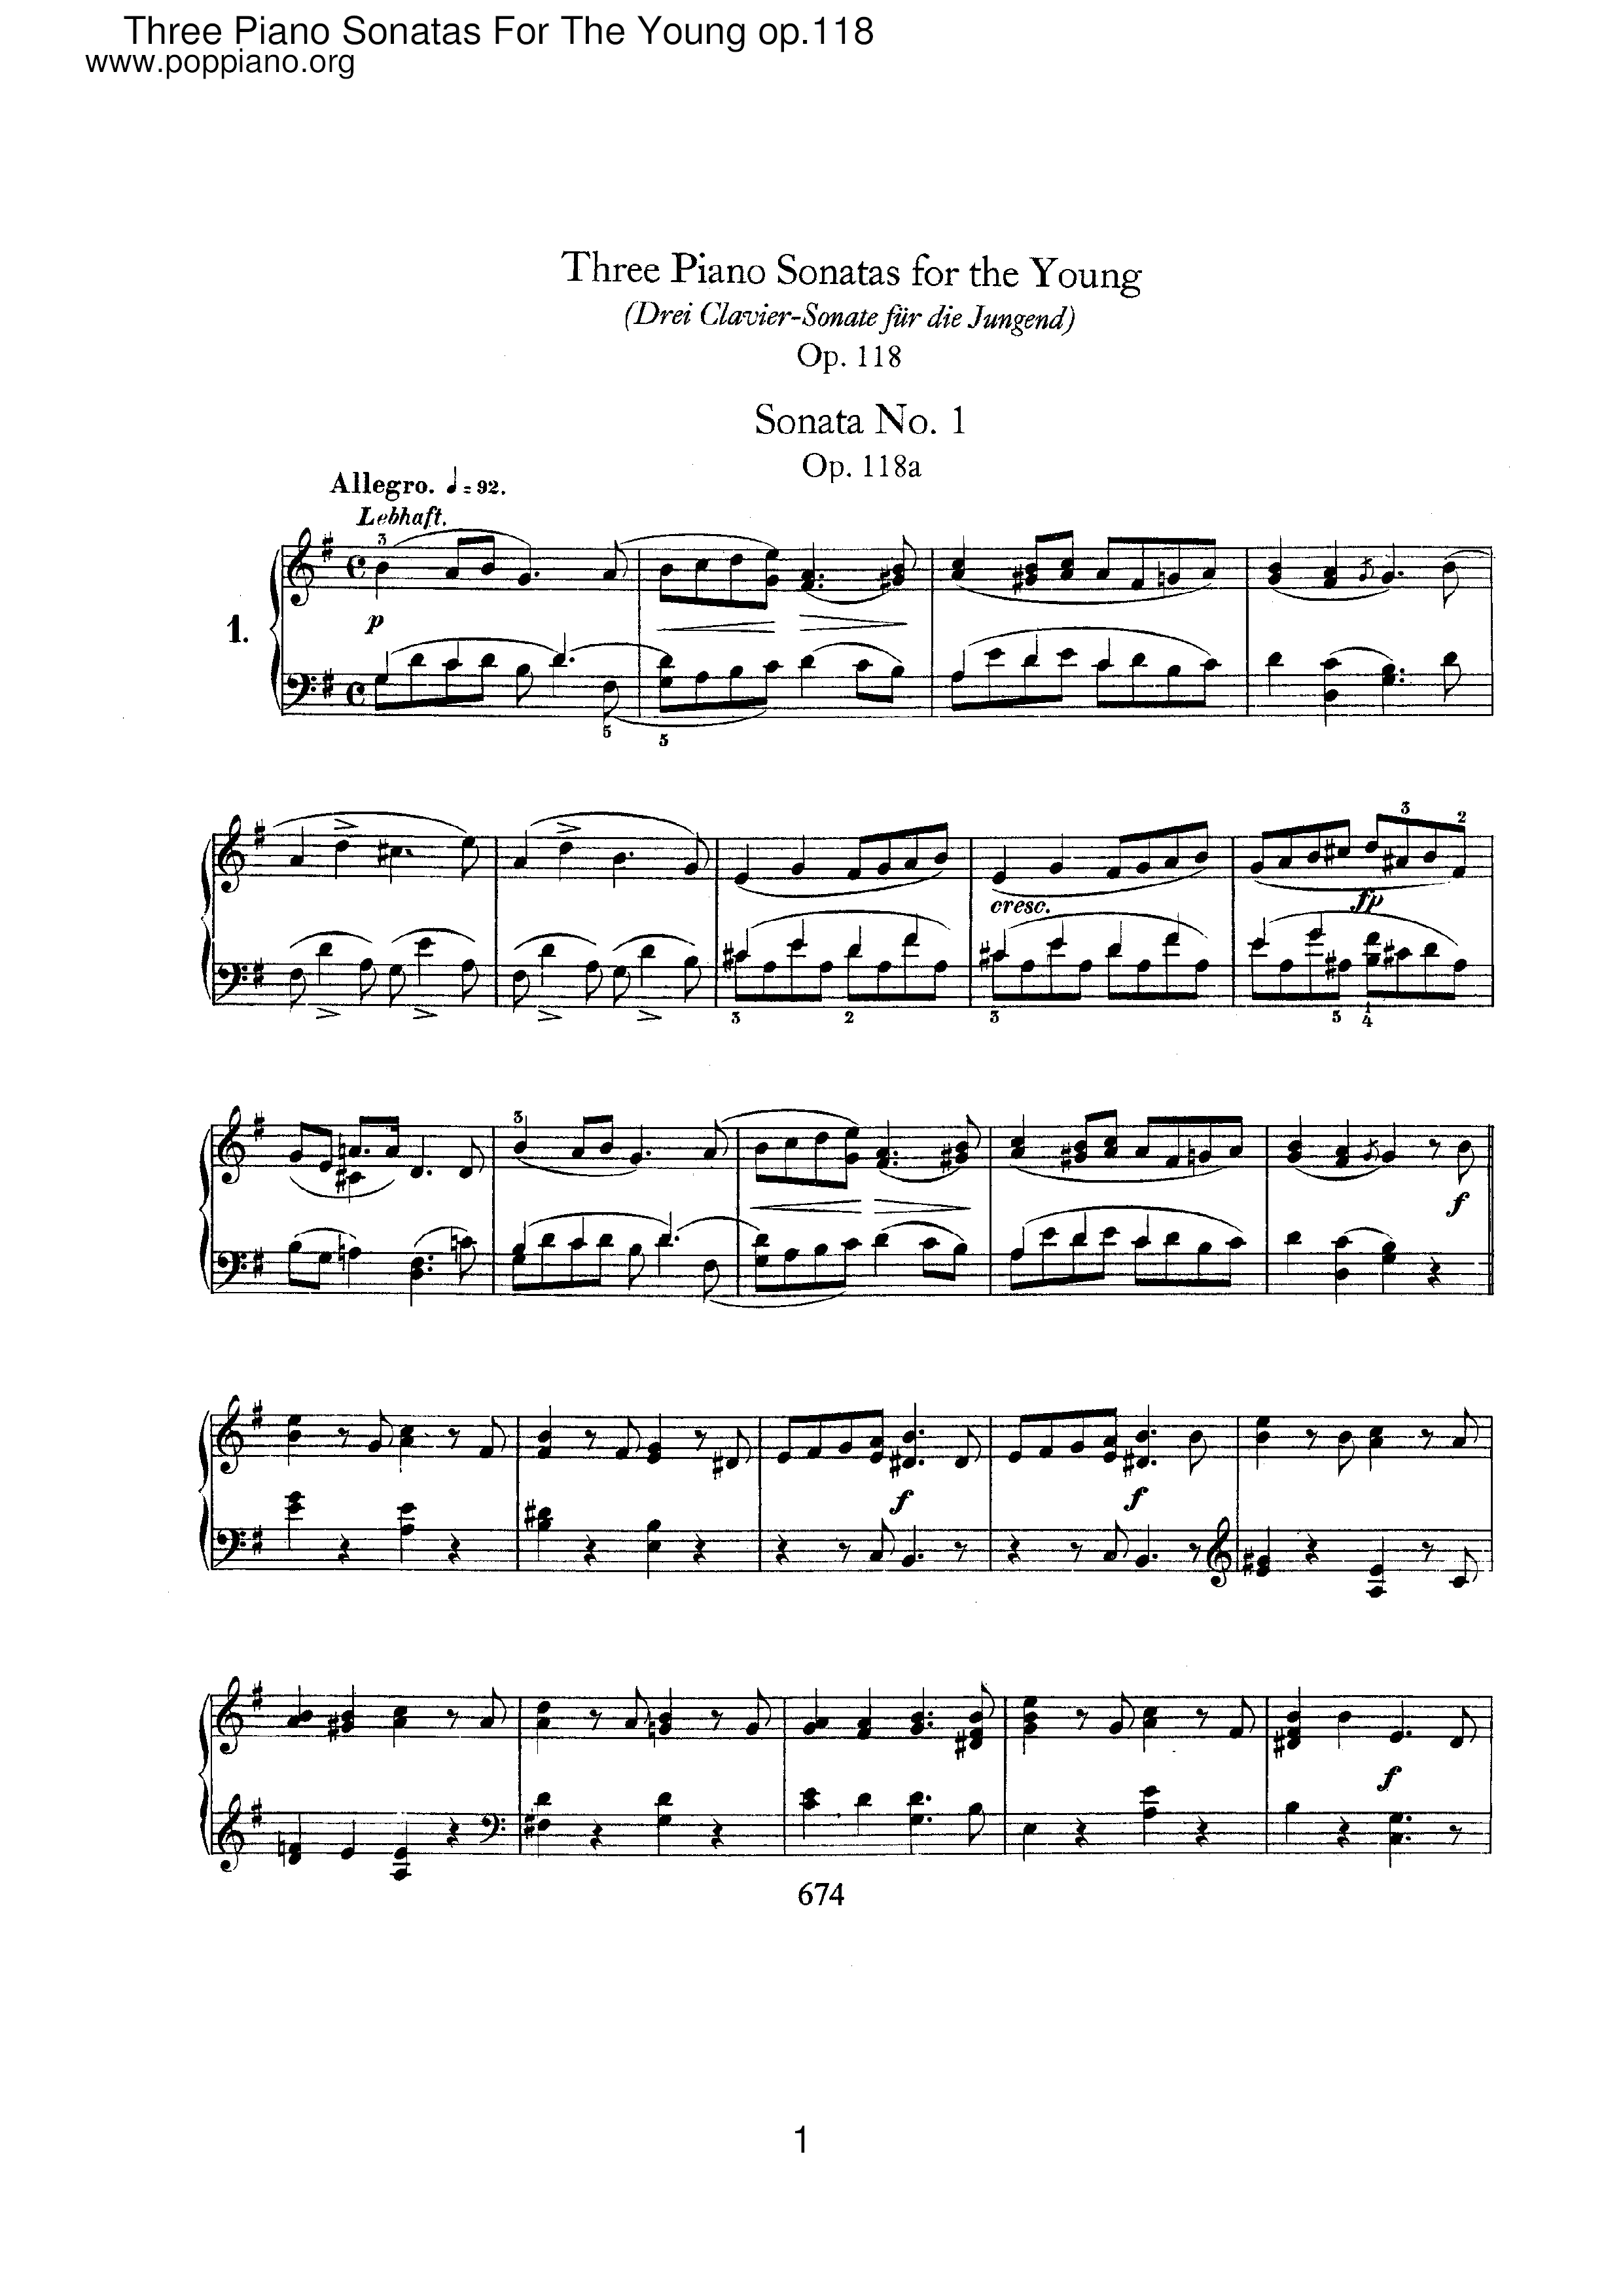 3 Piano Sonatas for the Young, Op.118 Score